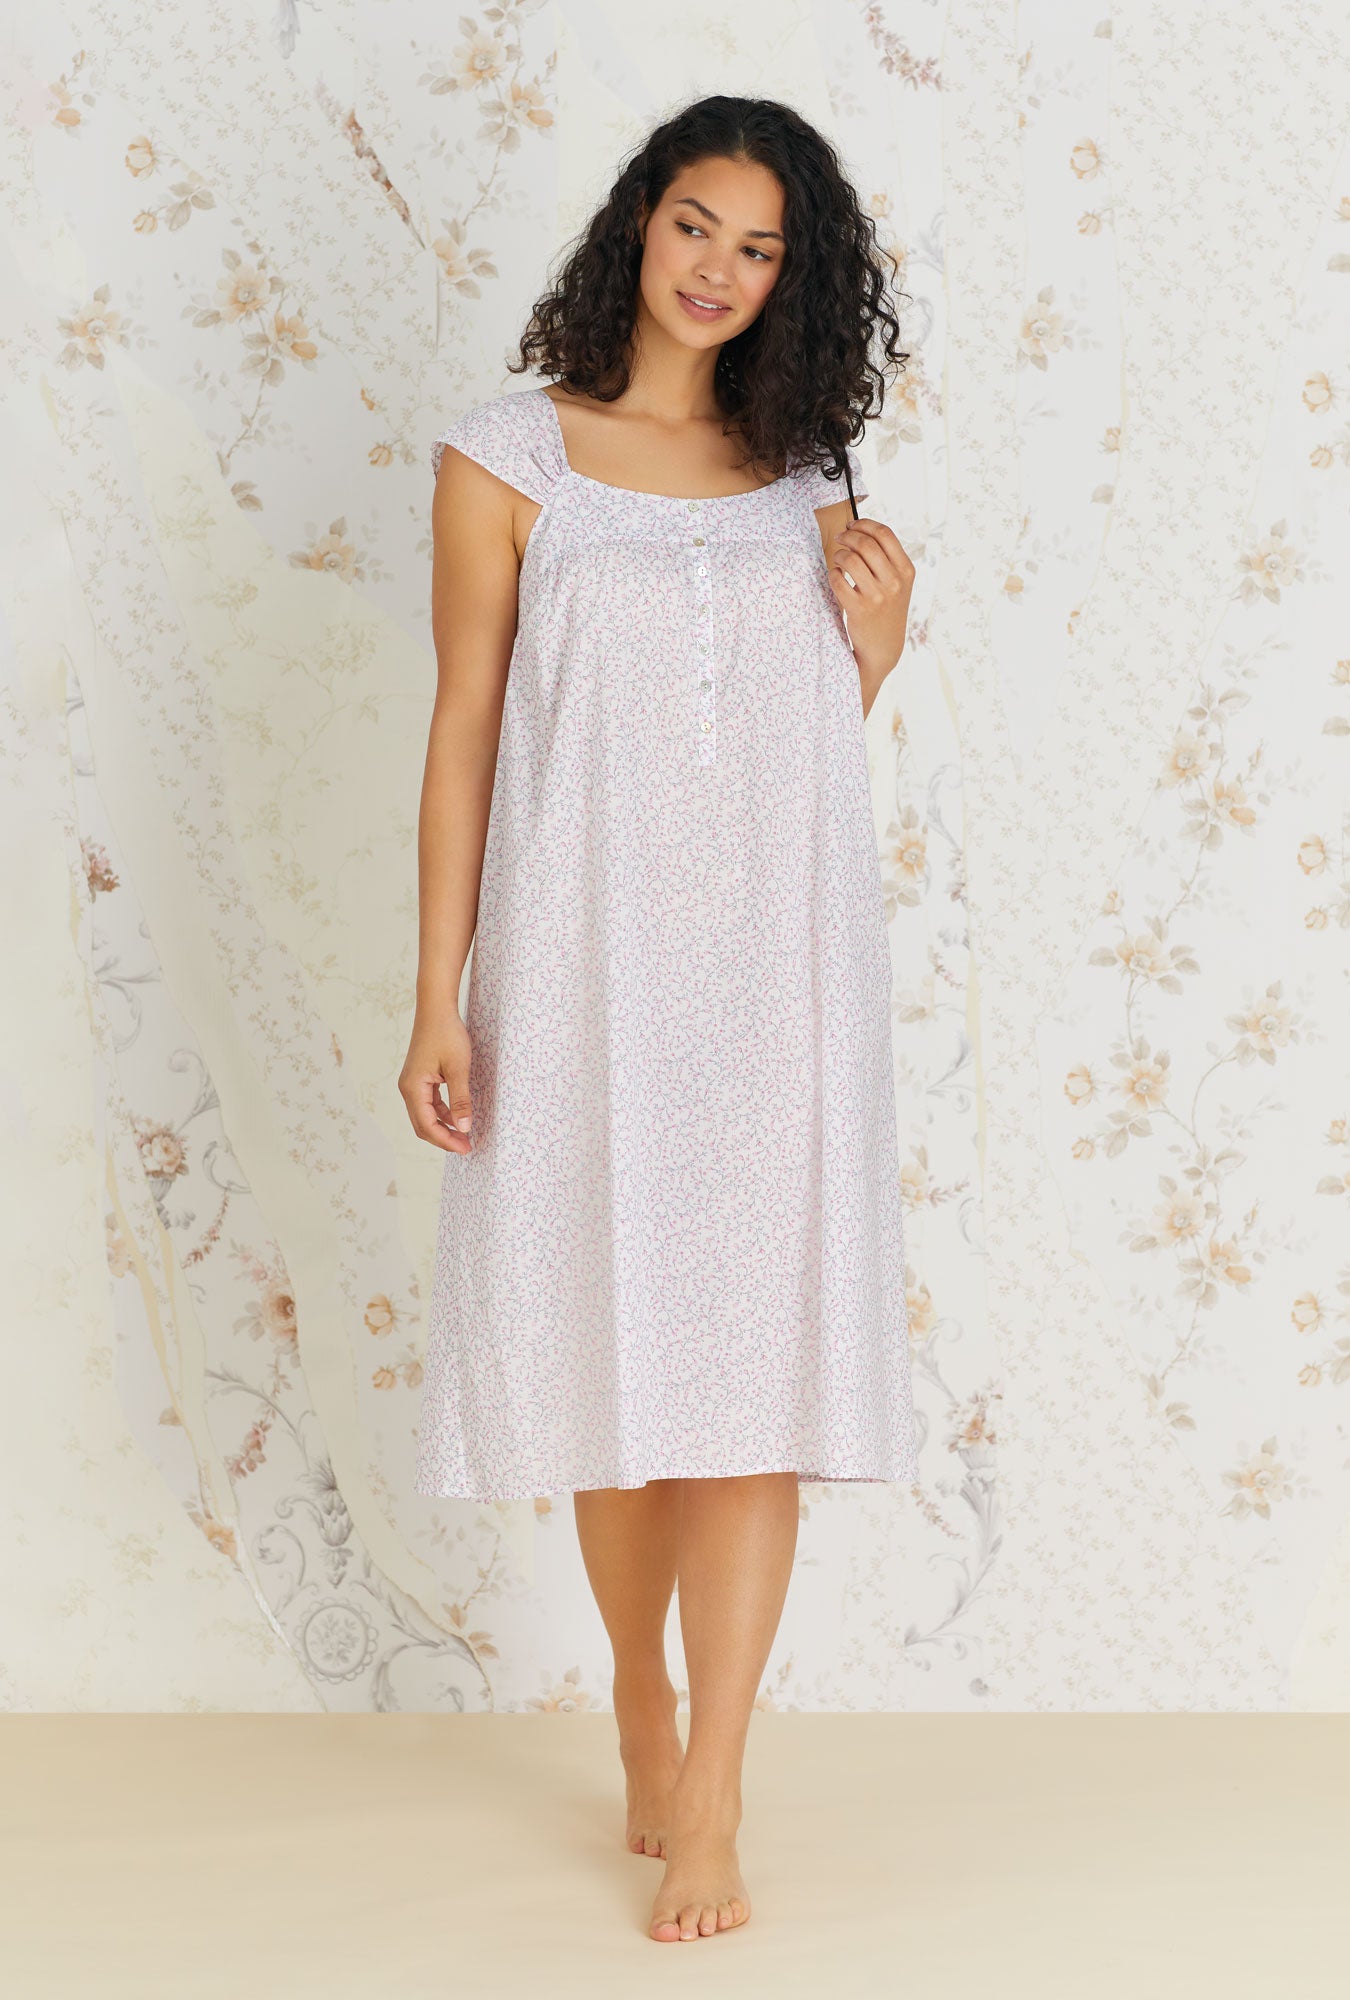 A lady wearing white cap sleeve cotton waltz nightgown with kayla baby rosette print.